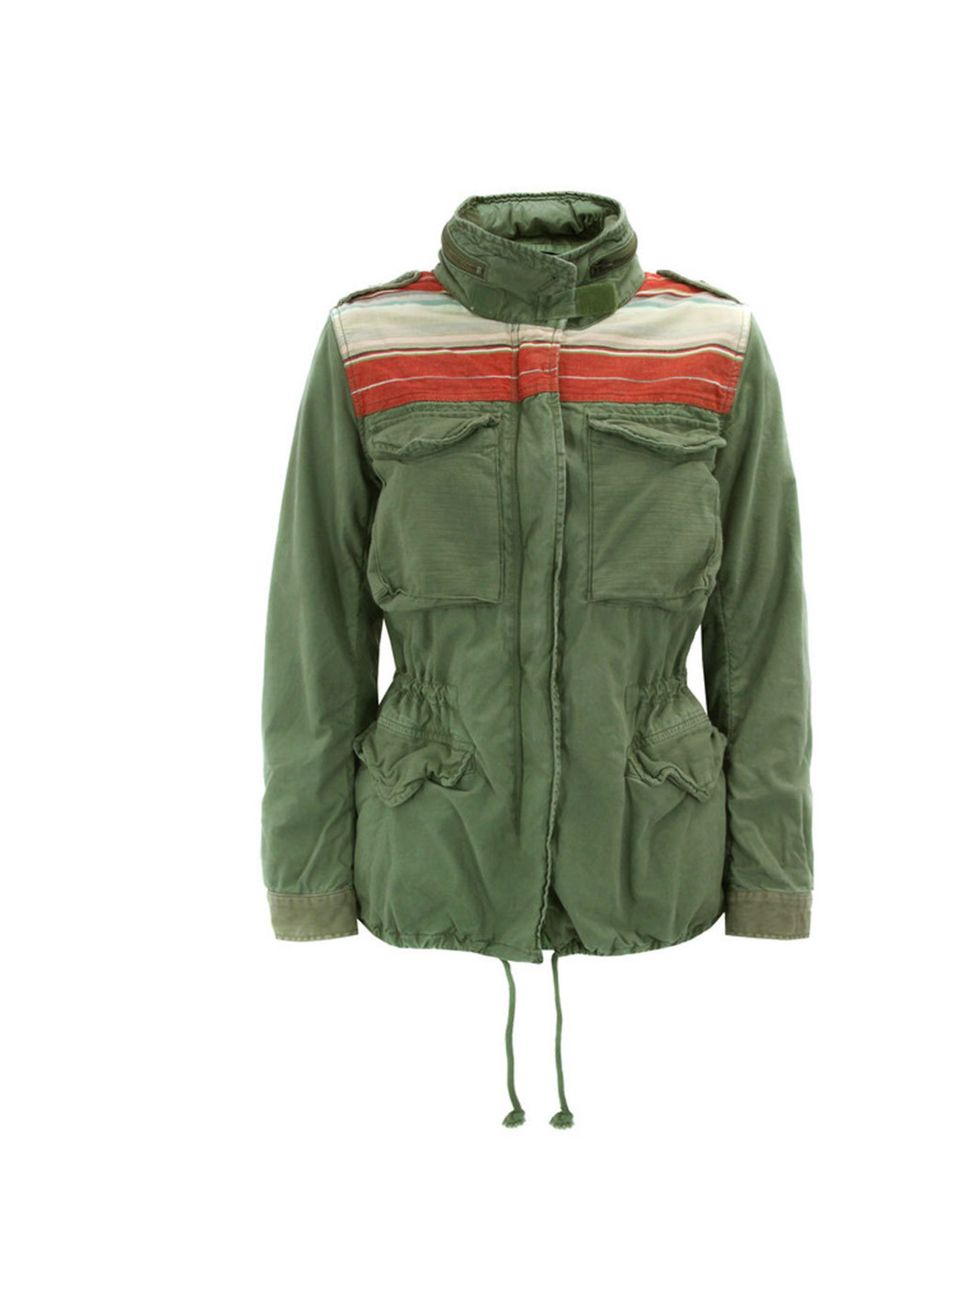 <p>A parka makes for the perfect spring cover-up so invest in the best, complete with a foldaway hood Denim &amp; Supply Ralph Lauren parka, £195, at <a href="http://www.coggles.com/item/Denim-and-Supply-Ralph-Lauren/Serape-Olive-Field-Jacket/AA8M">Coggl